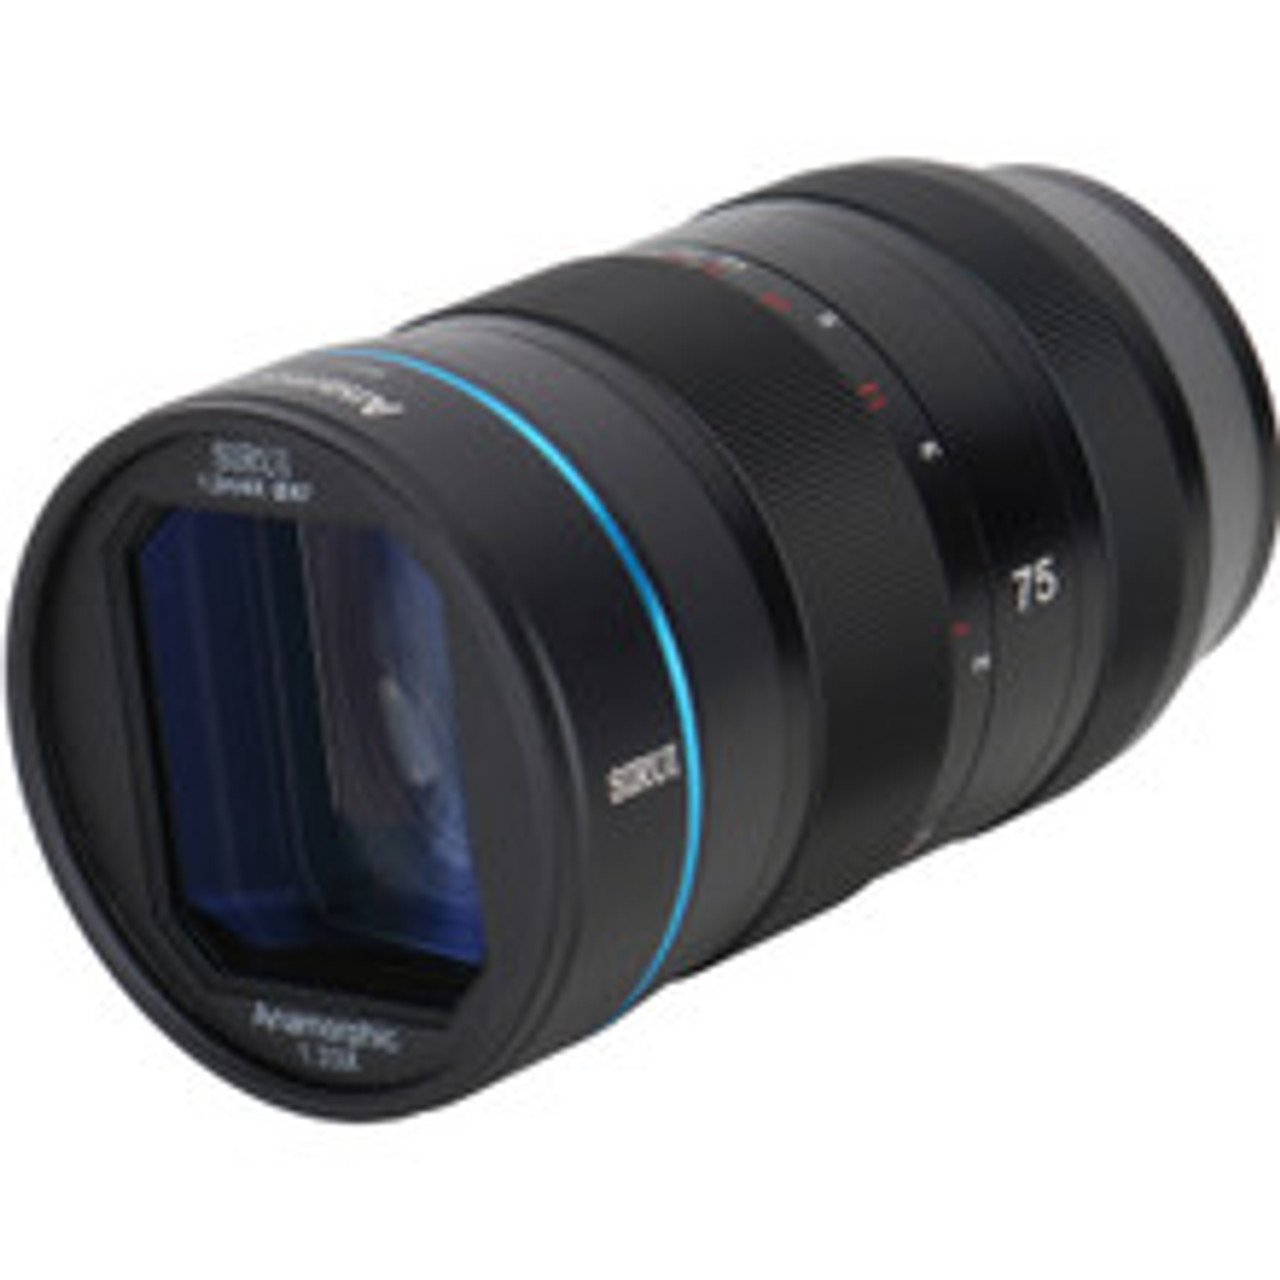 Sirui 75mm f/1.8 1.33x Anamorphic Lens | Order Online Now!